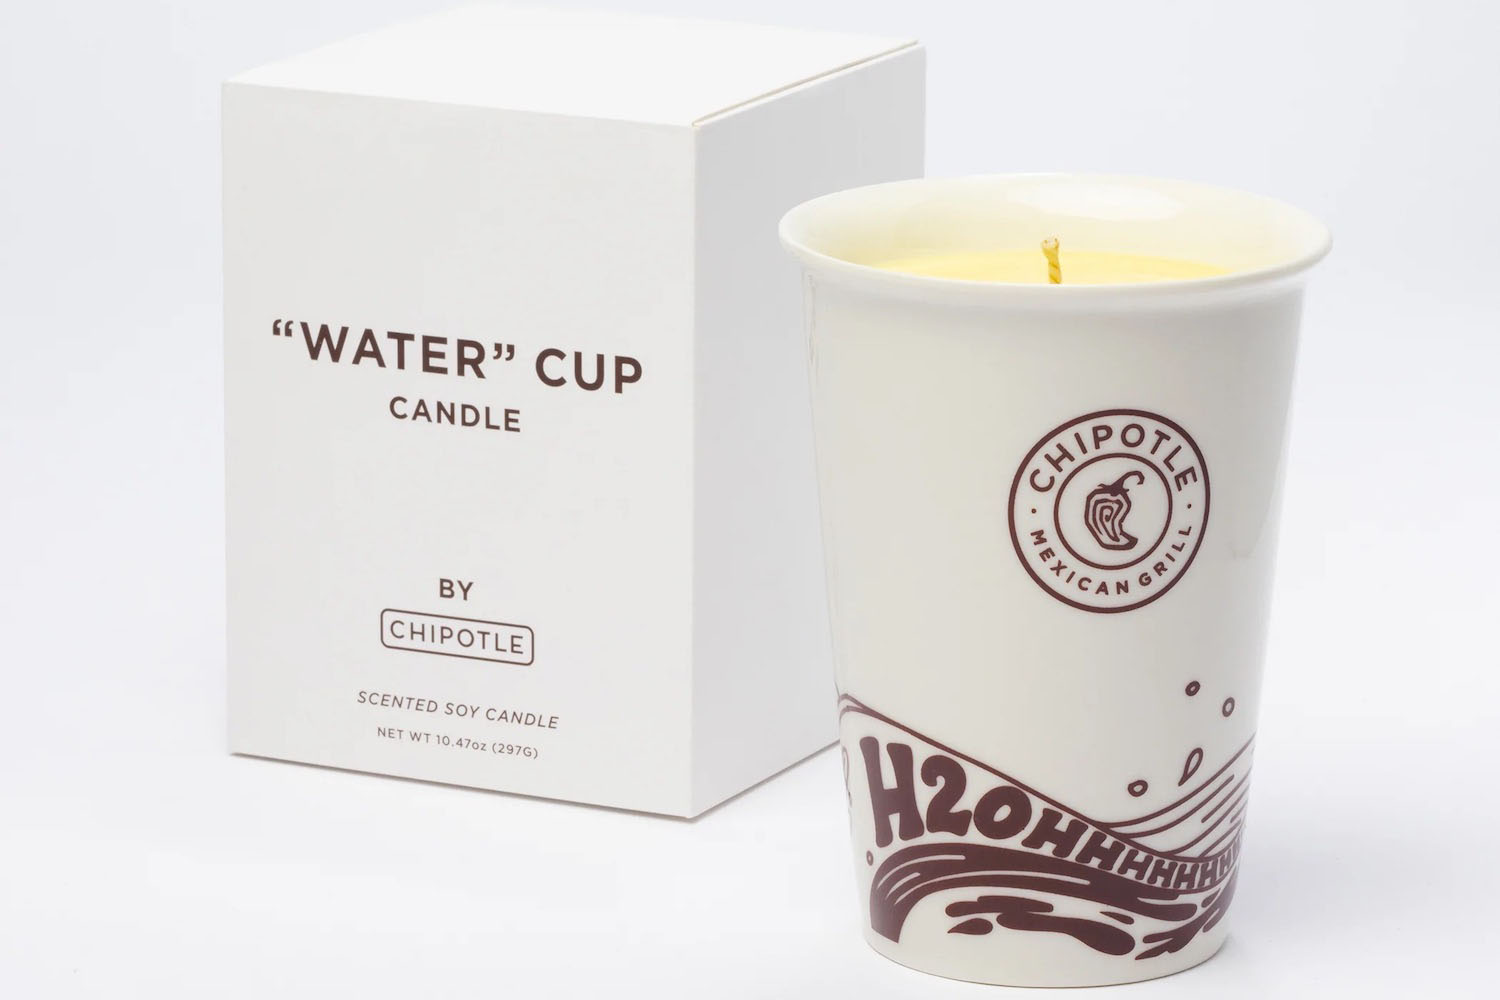 a chipotle candle and box on a white background